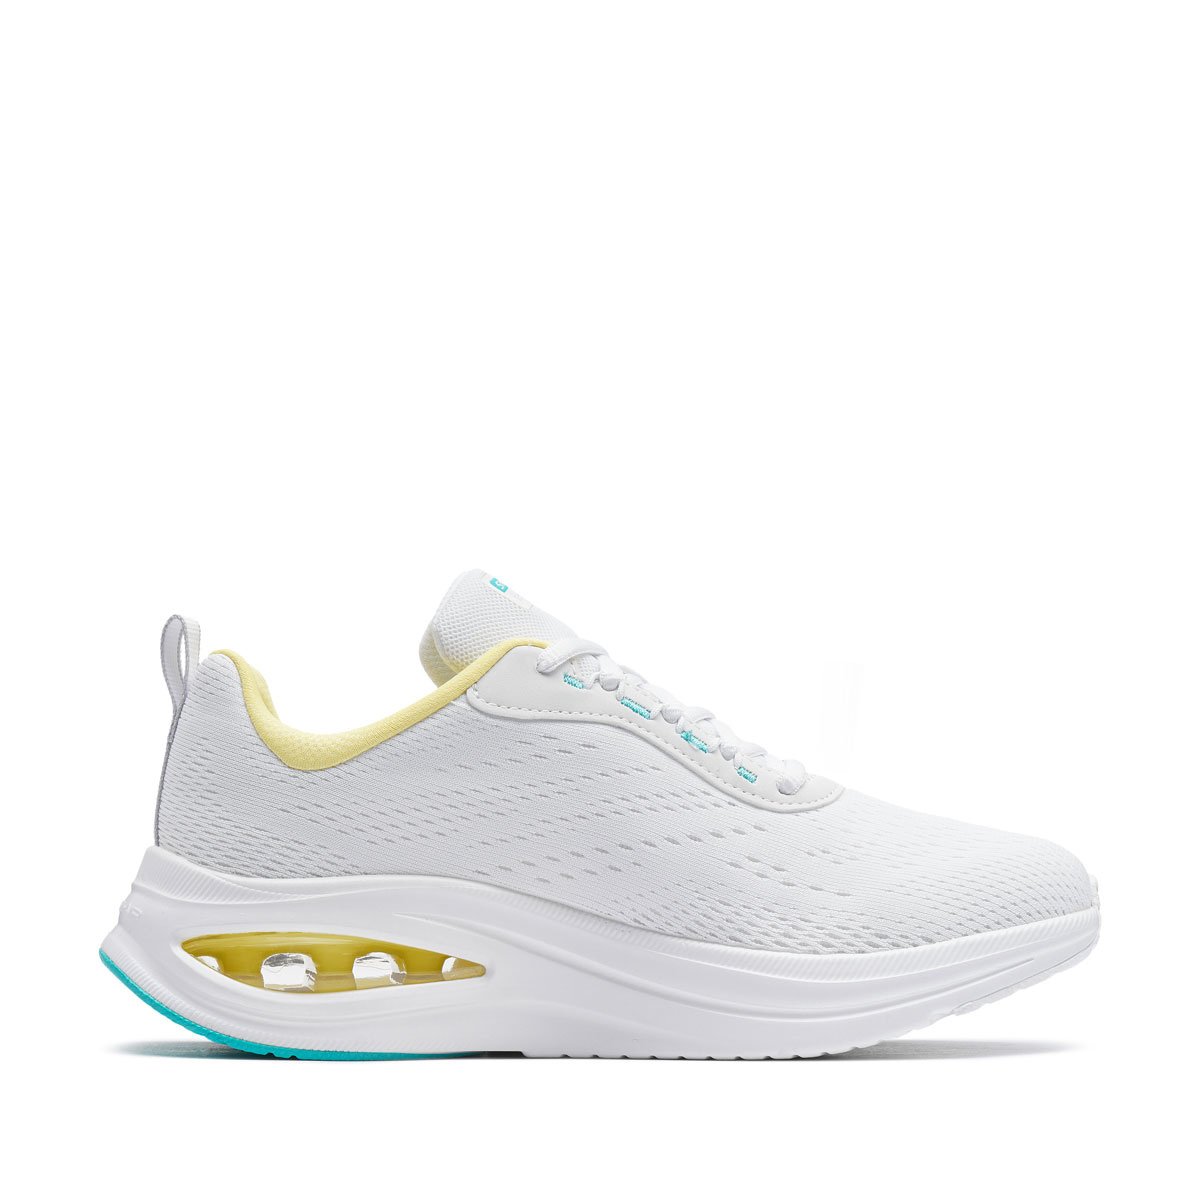 Skechers Skech-Air Meta-Aired Out Дамски маратонки 150131-WMLT